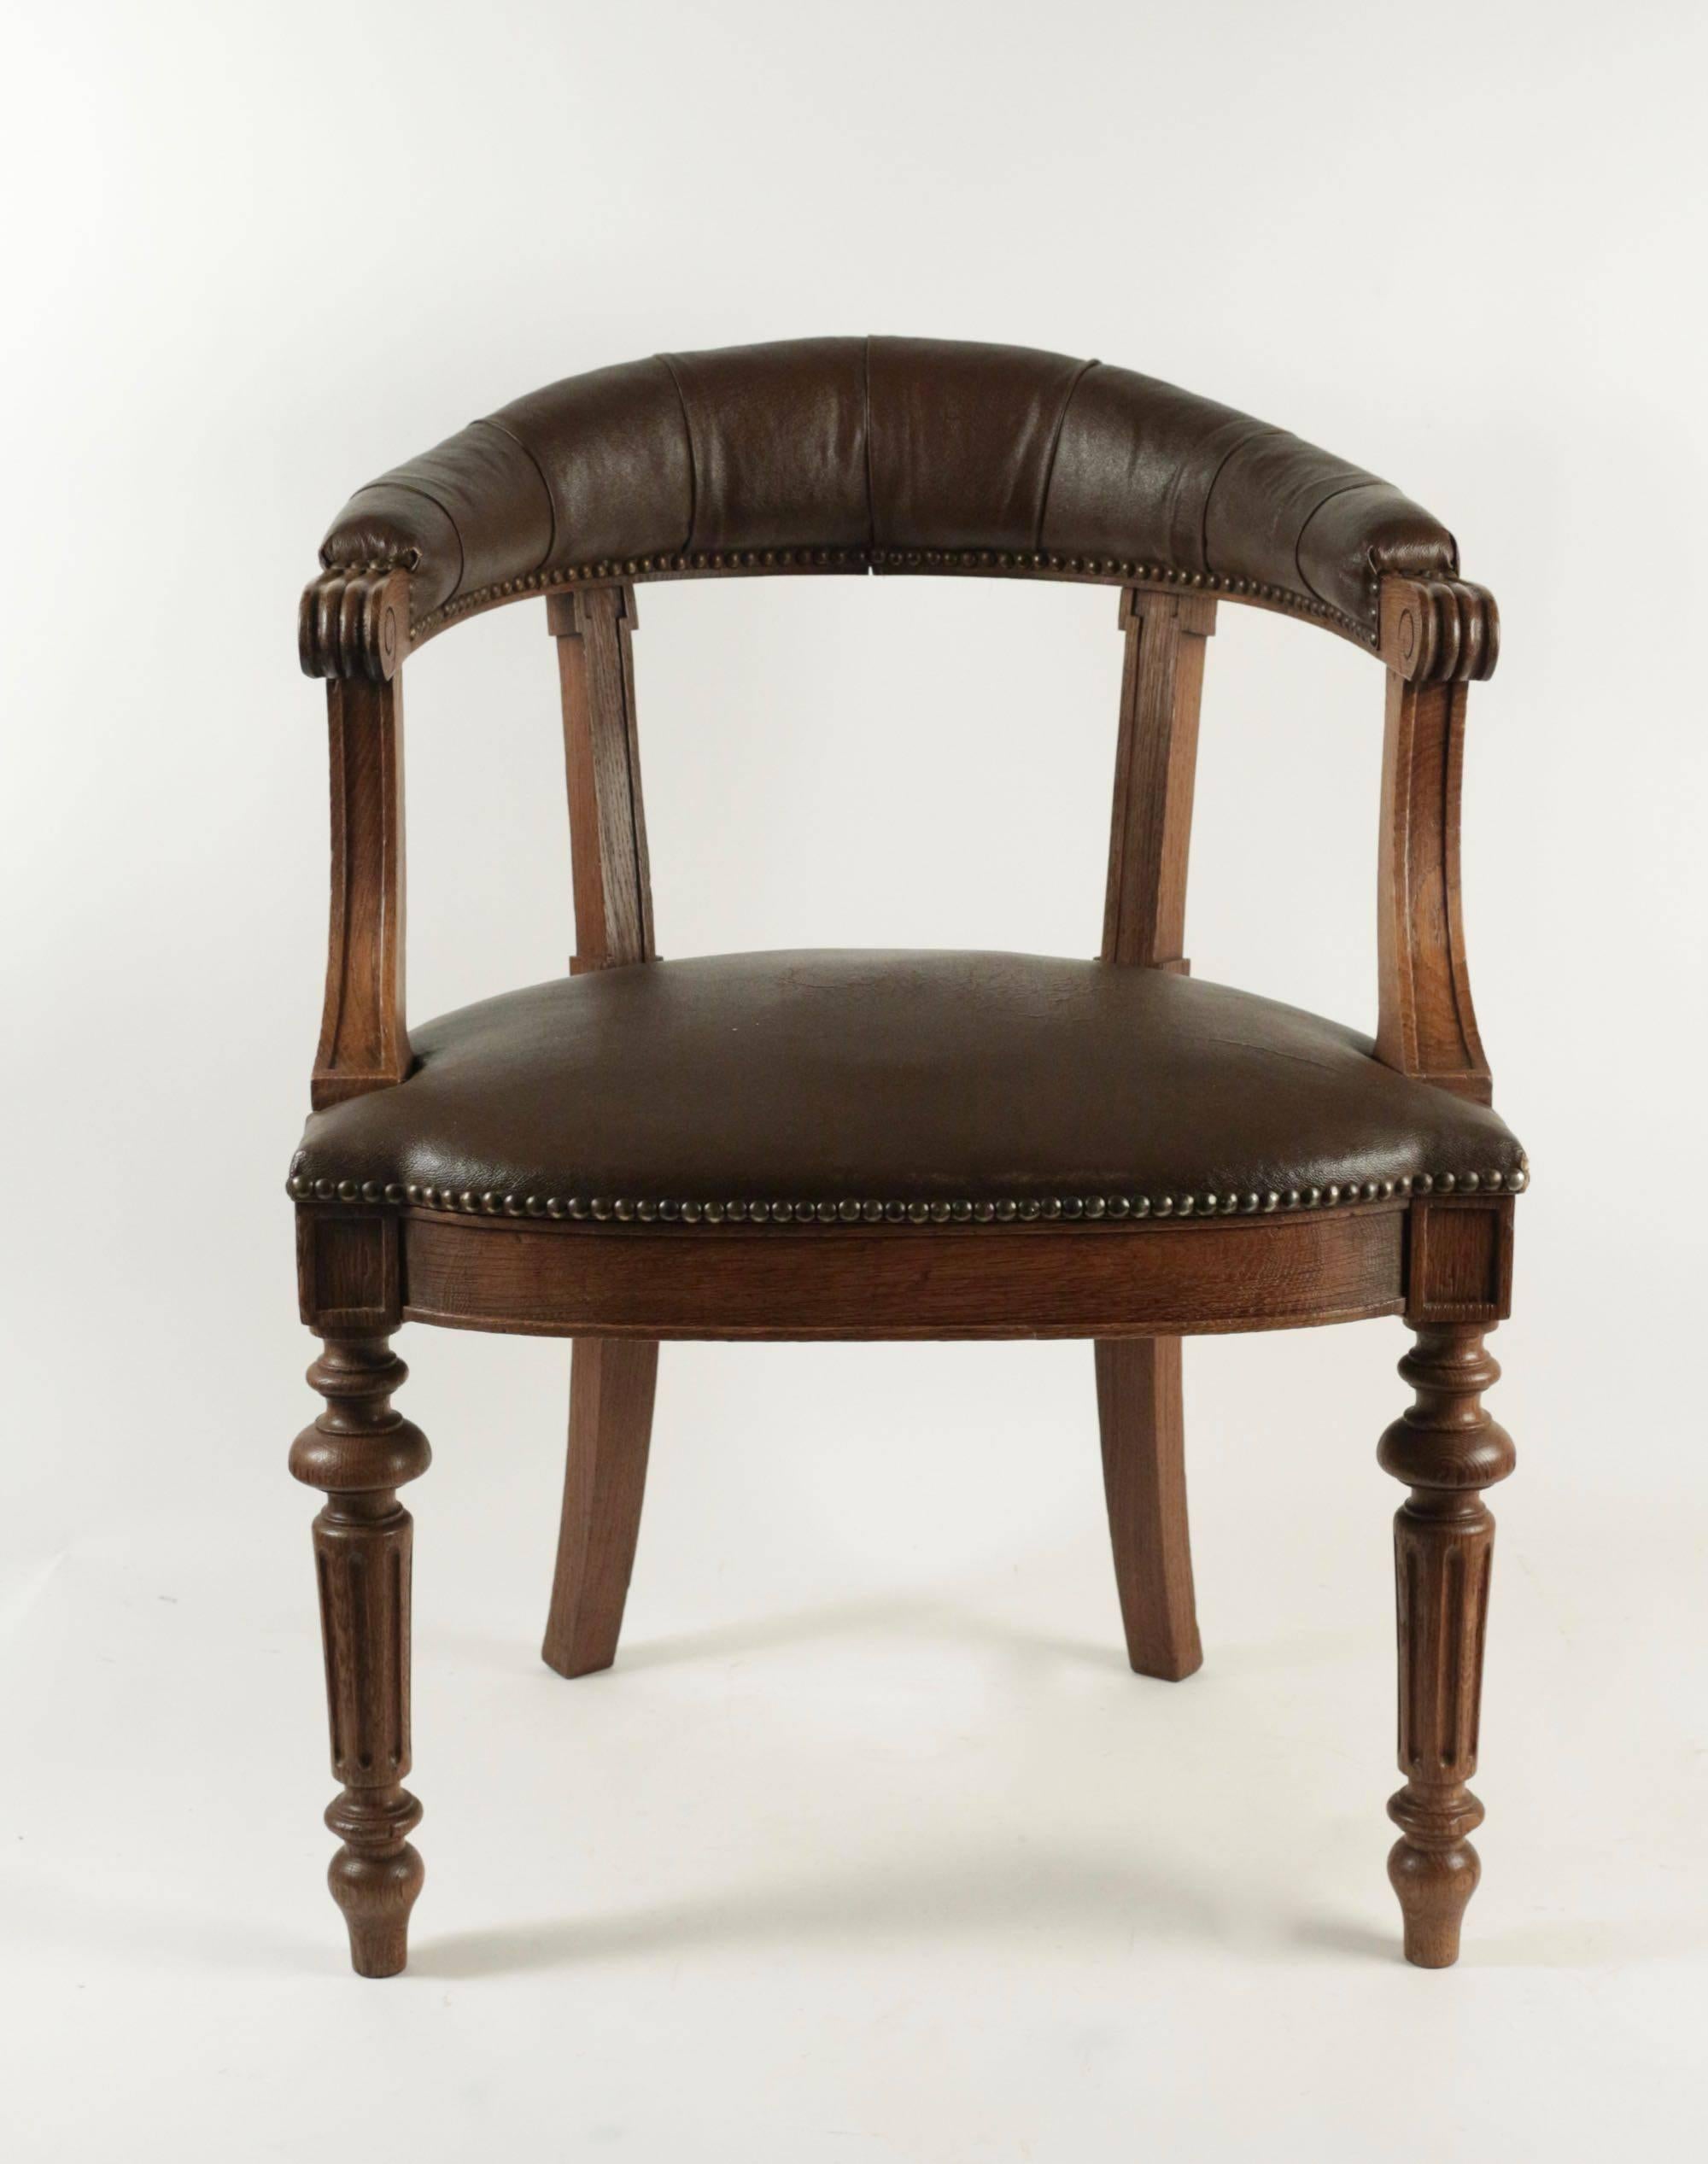 Office Chair from the Napoleon III Era in Fabric In The Imitation Of The Leather.